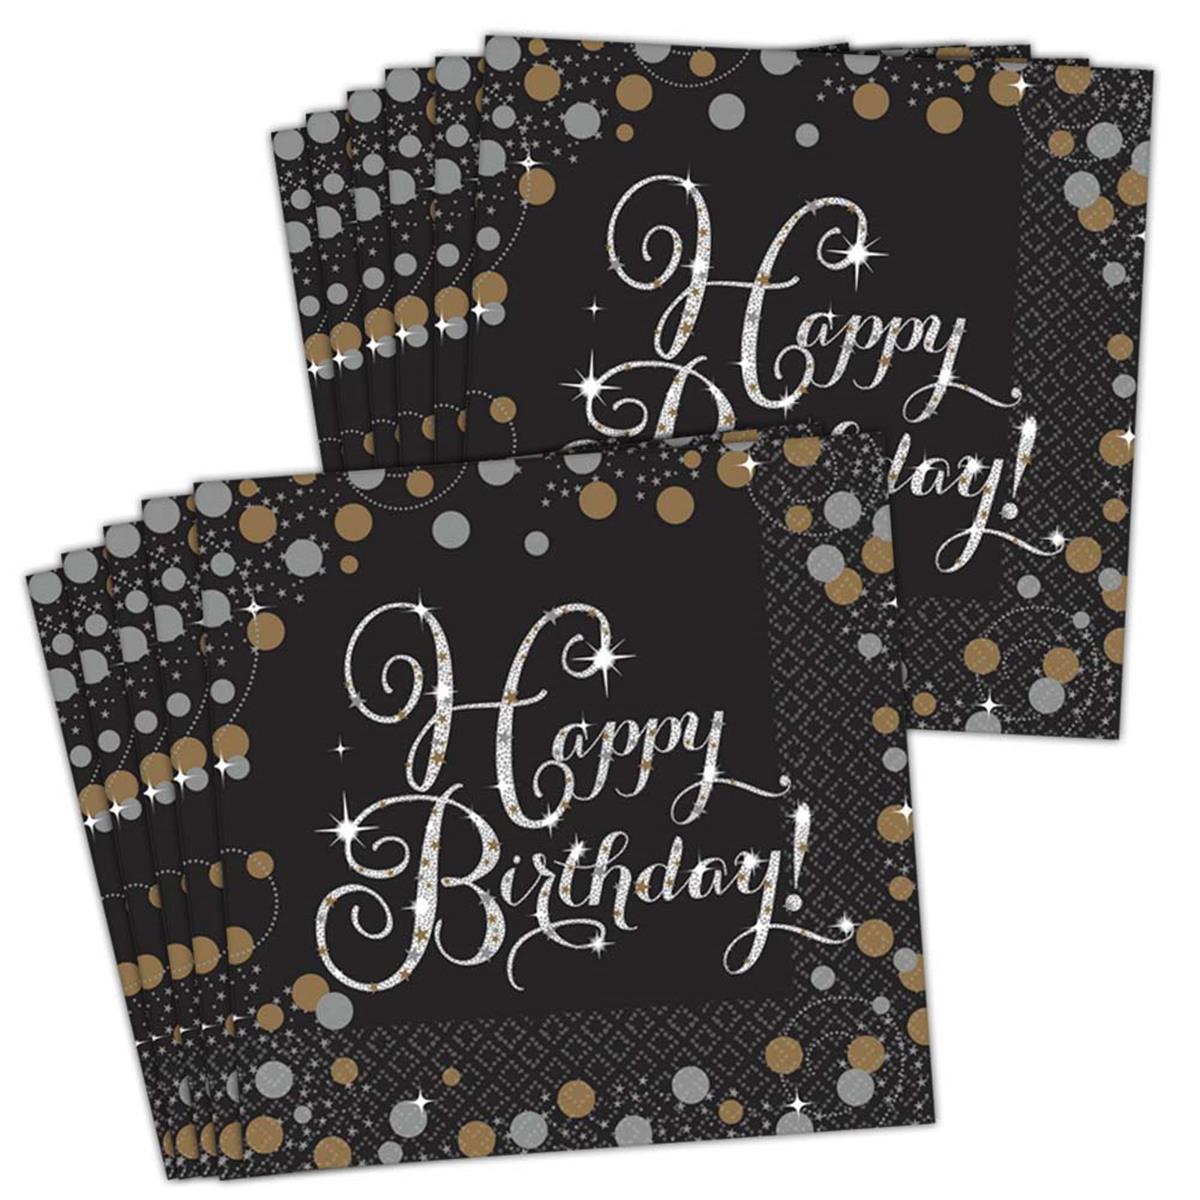 Picture of Amscan 269858 Sparkling Celebration Happy Birthday Lunch Napkin - 16 Piece